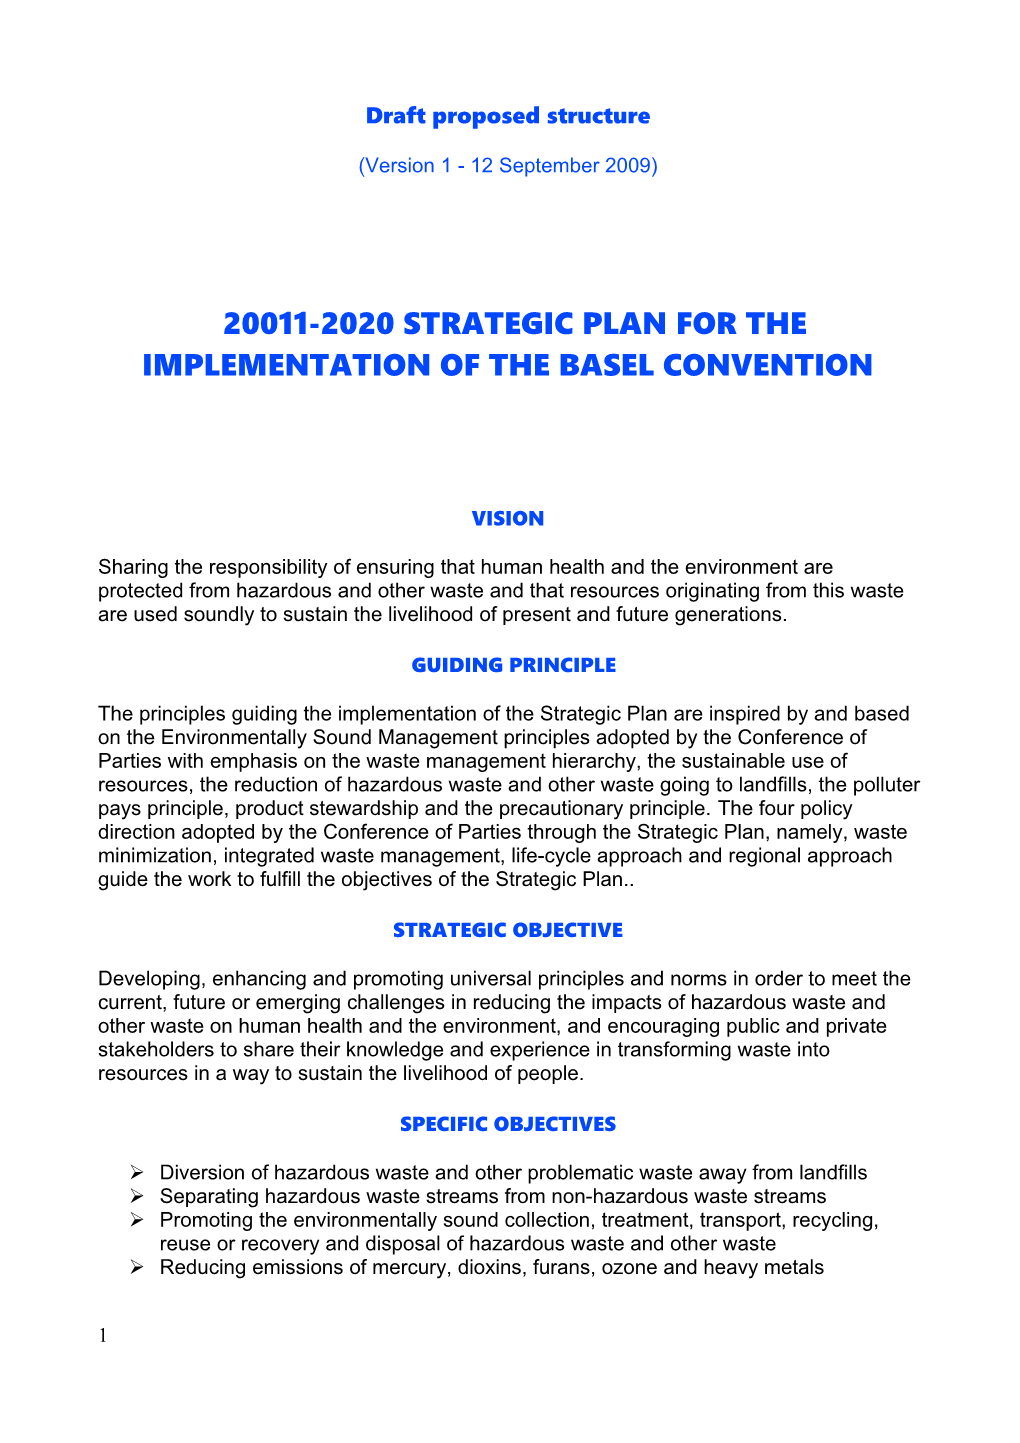 20011-2020 Strategic Plan for the Implementation of the Basel Convention